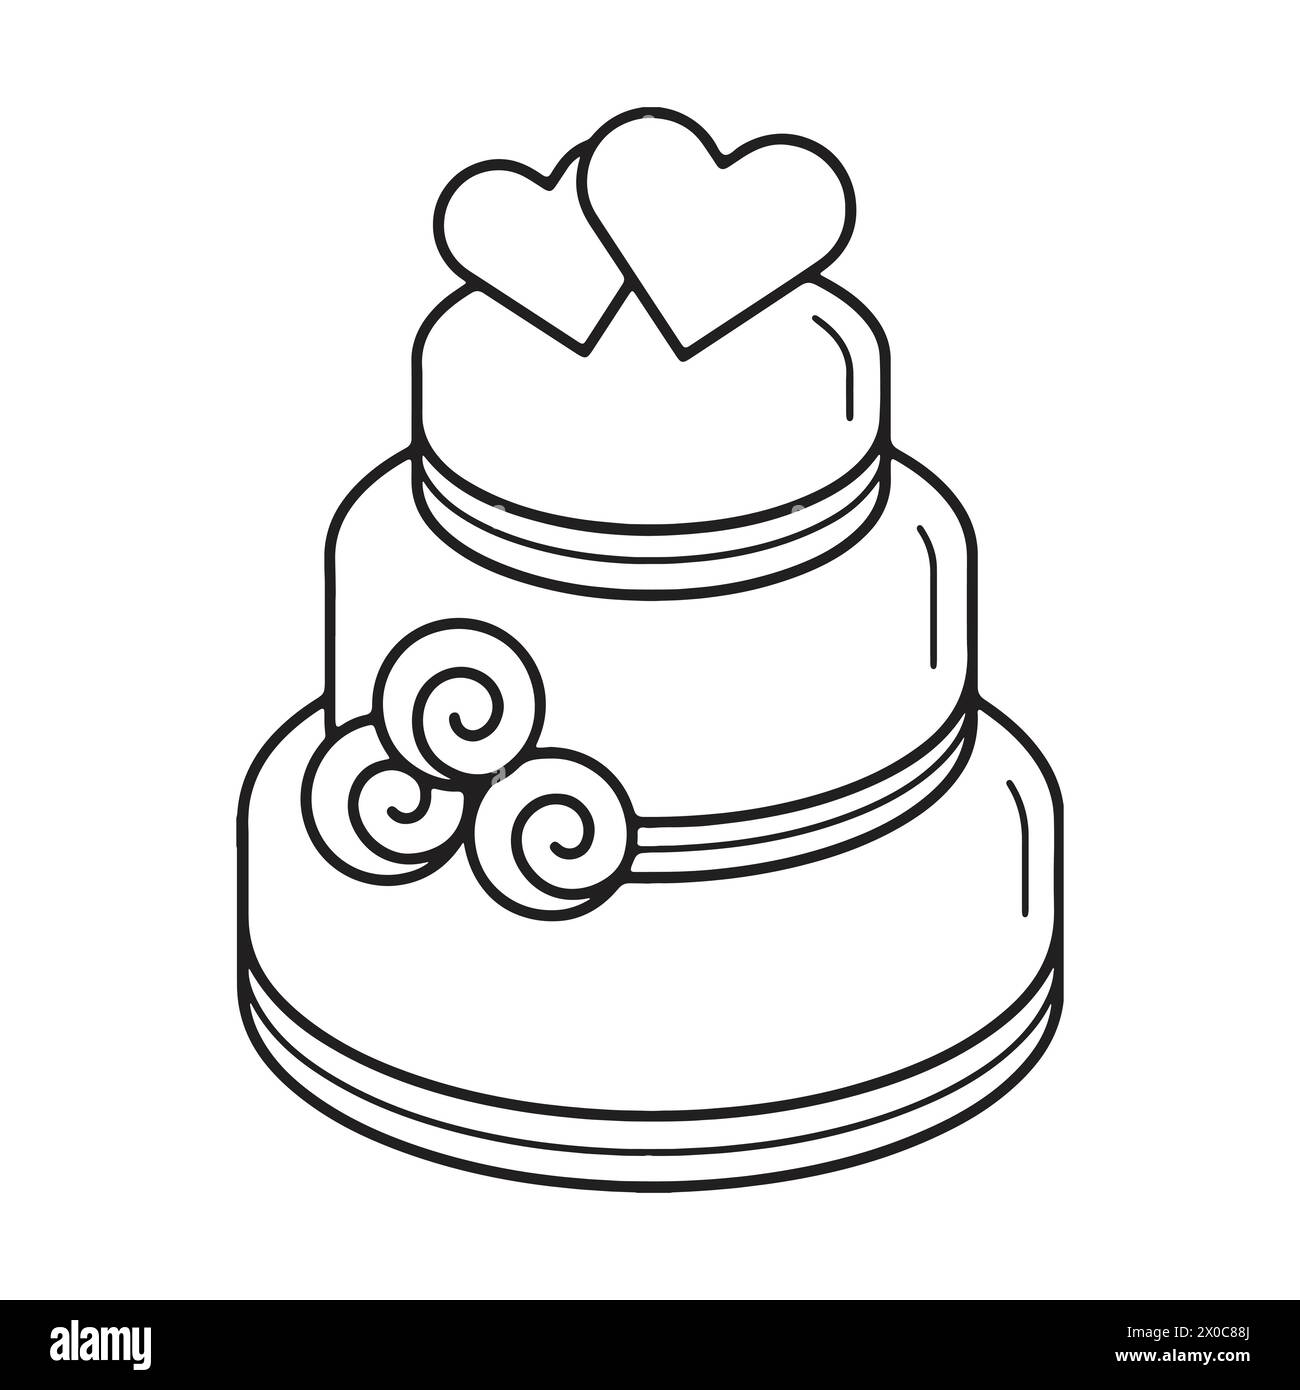 Delicate Birthday Cake Outline Drawing on Paper - Artistry in Lines Stock Vector